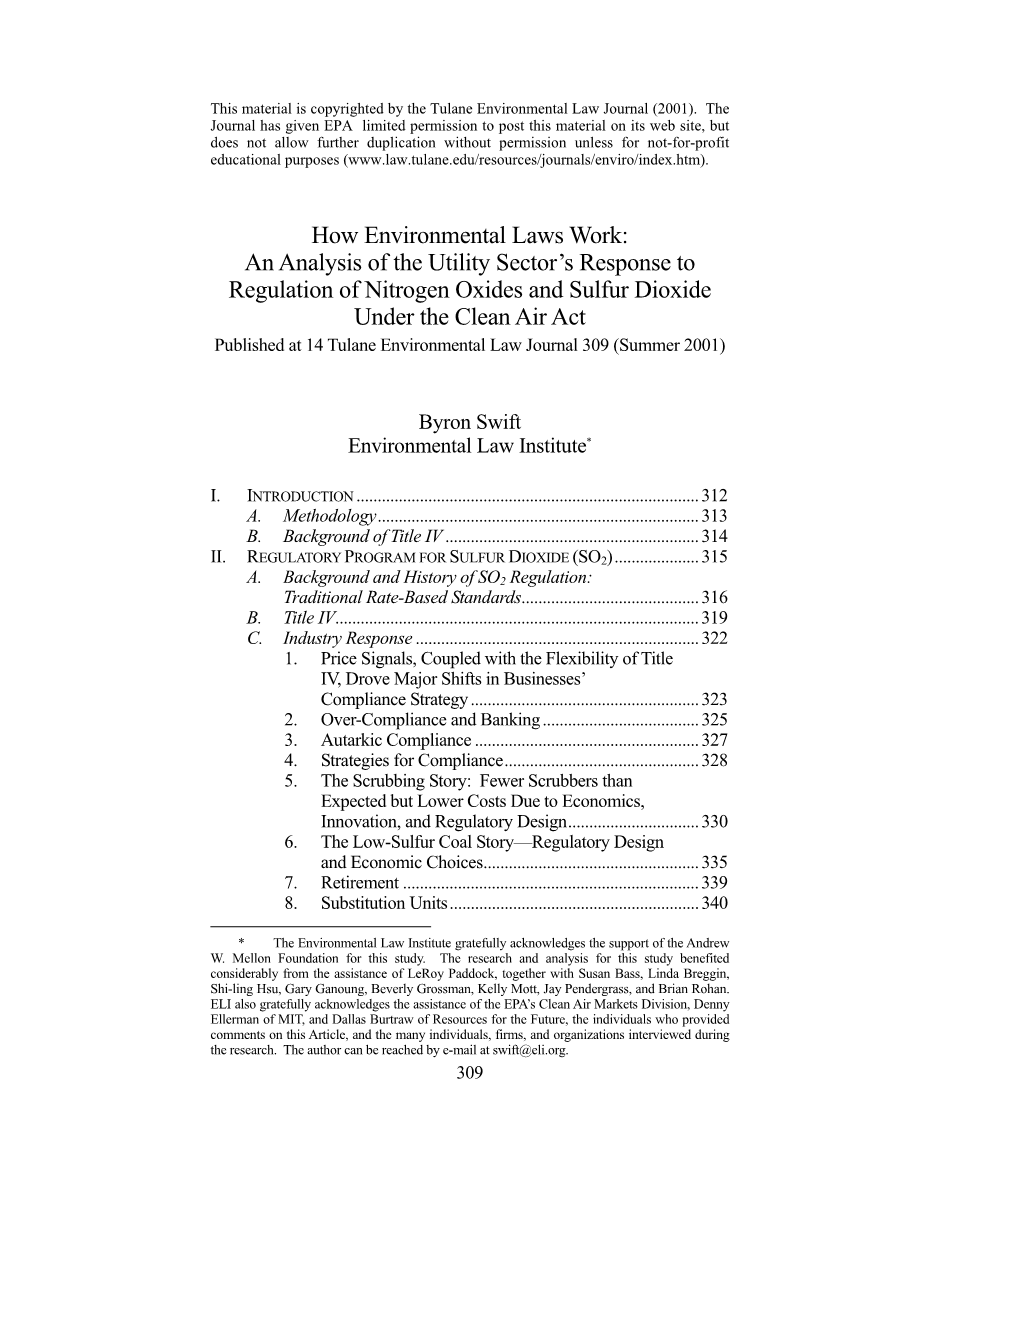 How Environmental Laws Work: an Analysis of the Utility Sector's Response to Regulation of Nitrogen Oxides and Sulfur Dioxide